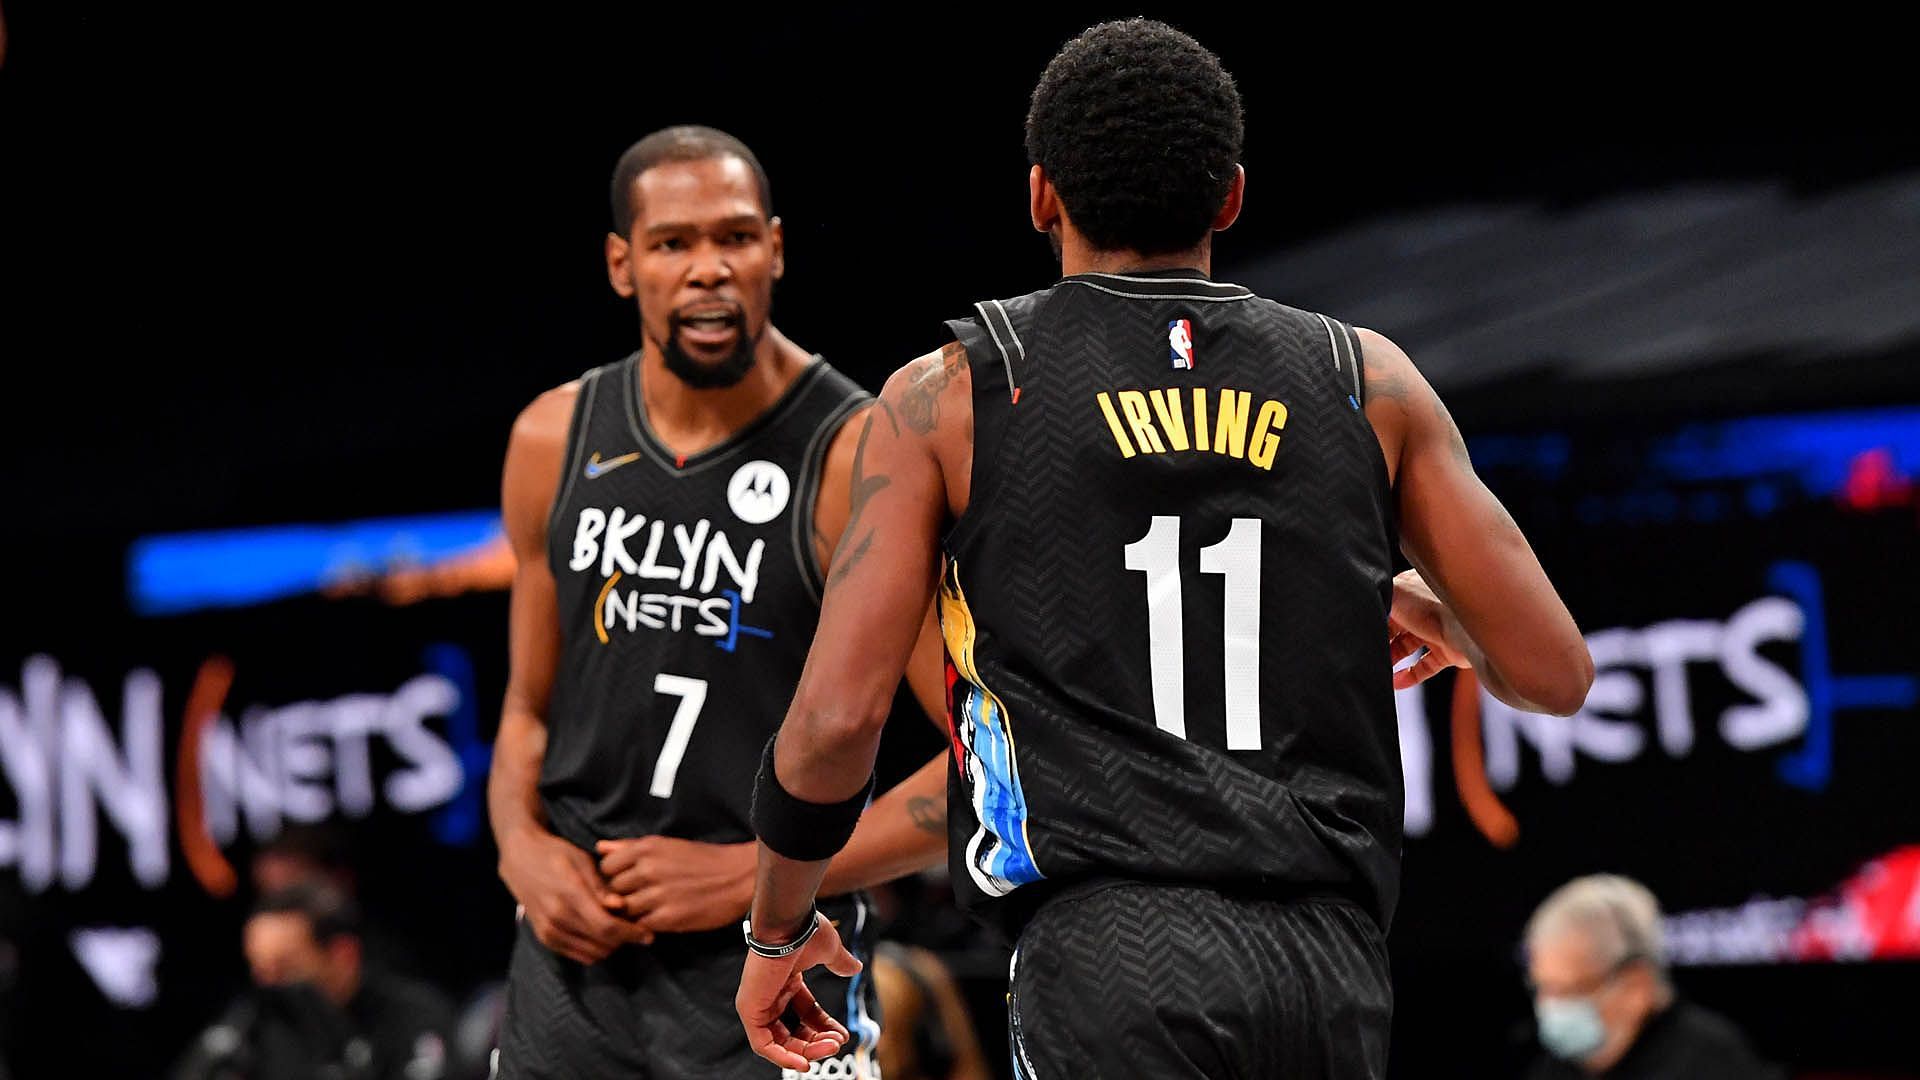 KD&#039;s decision to play with &lt;a href=&#039;https://www.sportskeeda.com/player/kyrie-irving&#039; target=&#039;_blank&#039; rel=&#039;noopener noreferrer&#039;&gt;Kyrie Irving&lt;/a&gt; hasn&#039;t turned out well for the former MVP. [Photo: NBA.com]